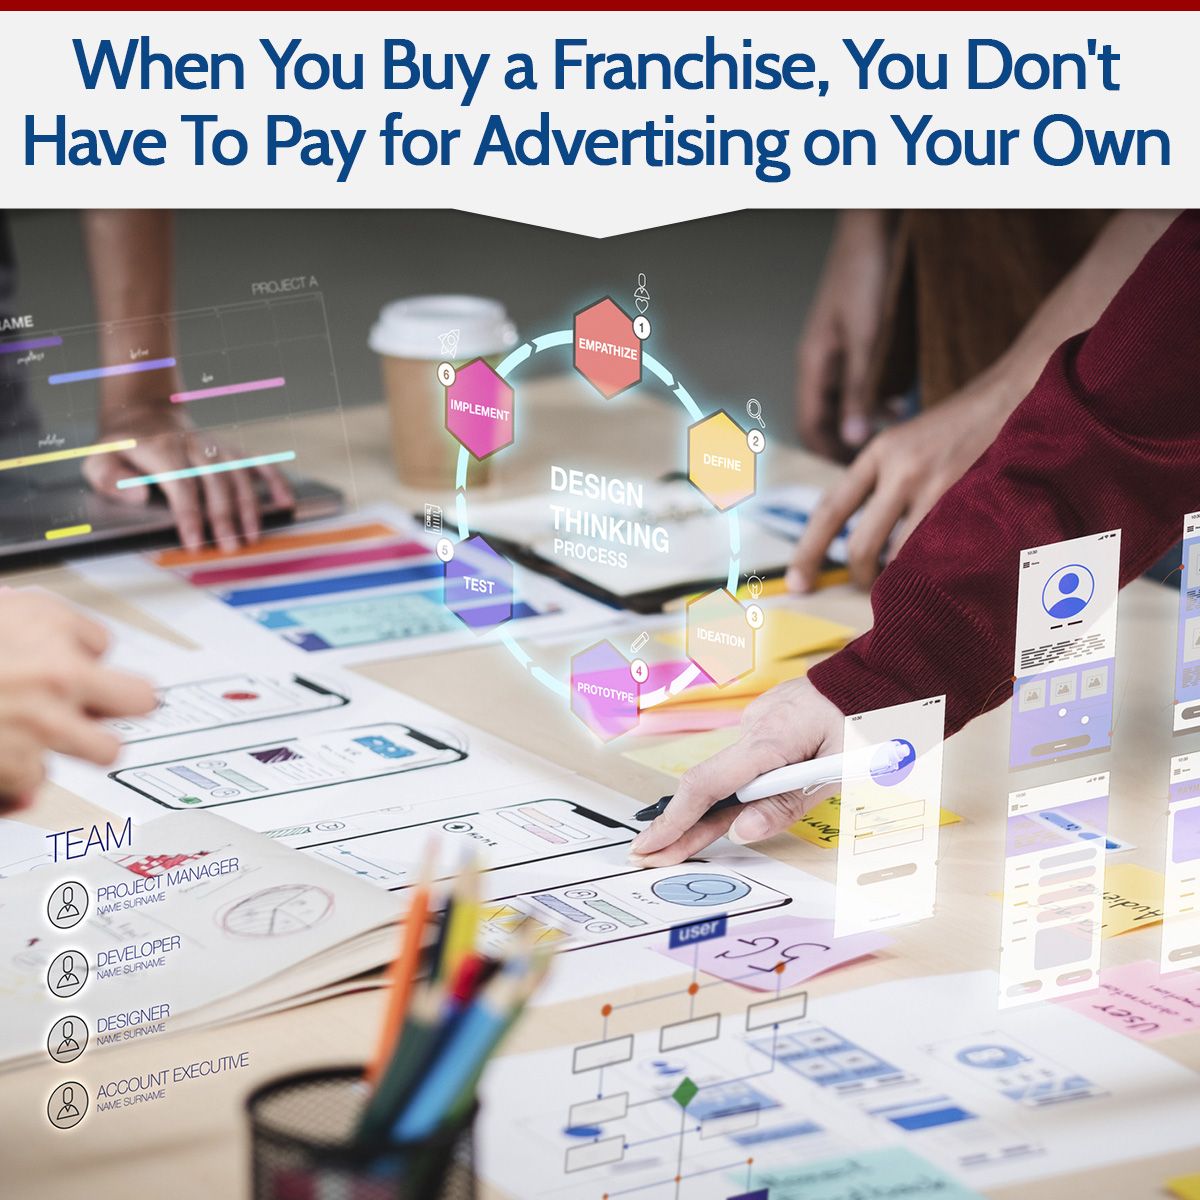 When You Buy a Franchise, You Don't Have To Pay for Advertising on Your Own